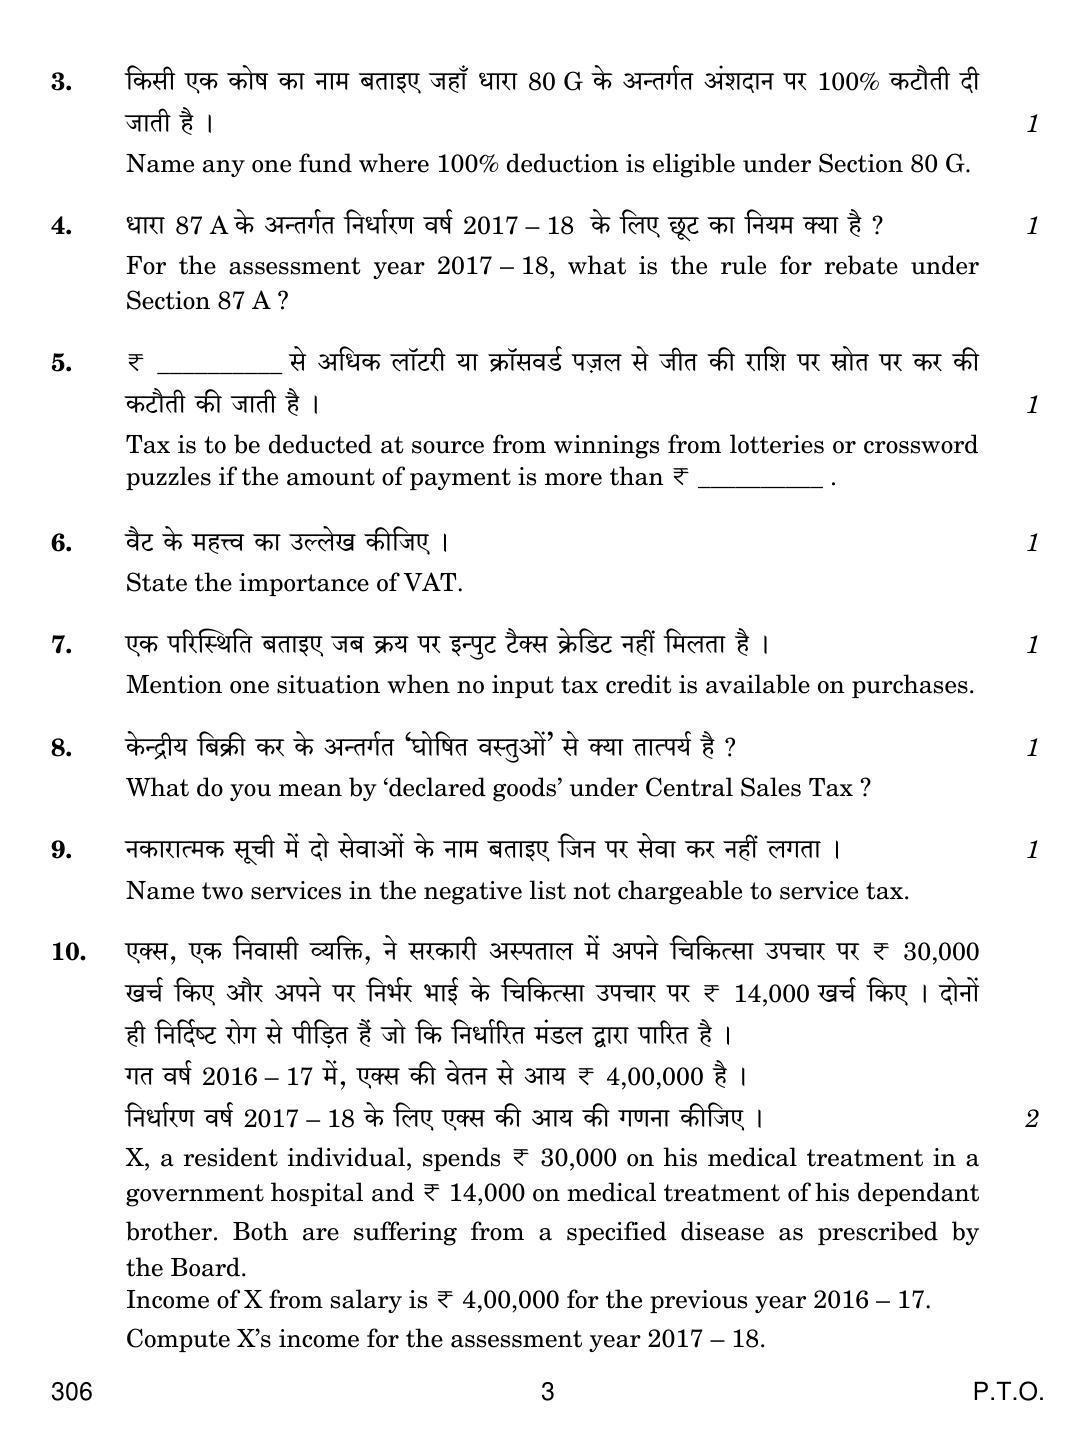 CBSE Class 12 306 TAXATION 2018 Question Paper - Page 3